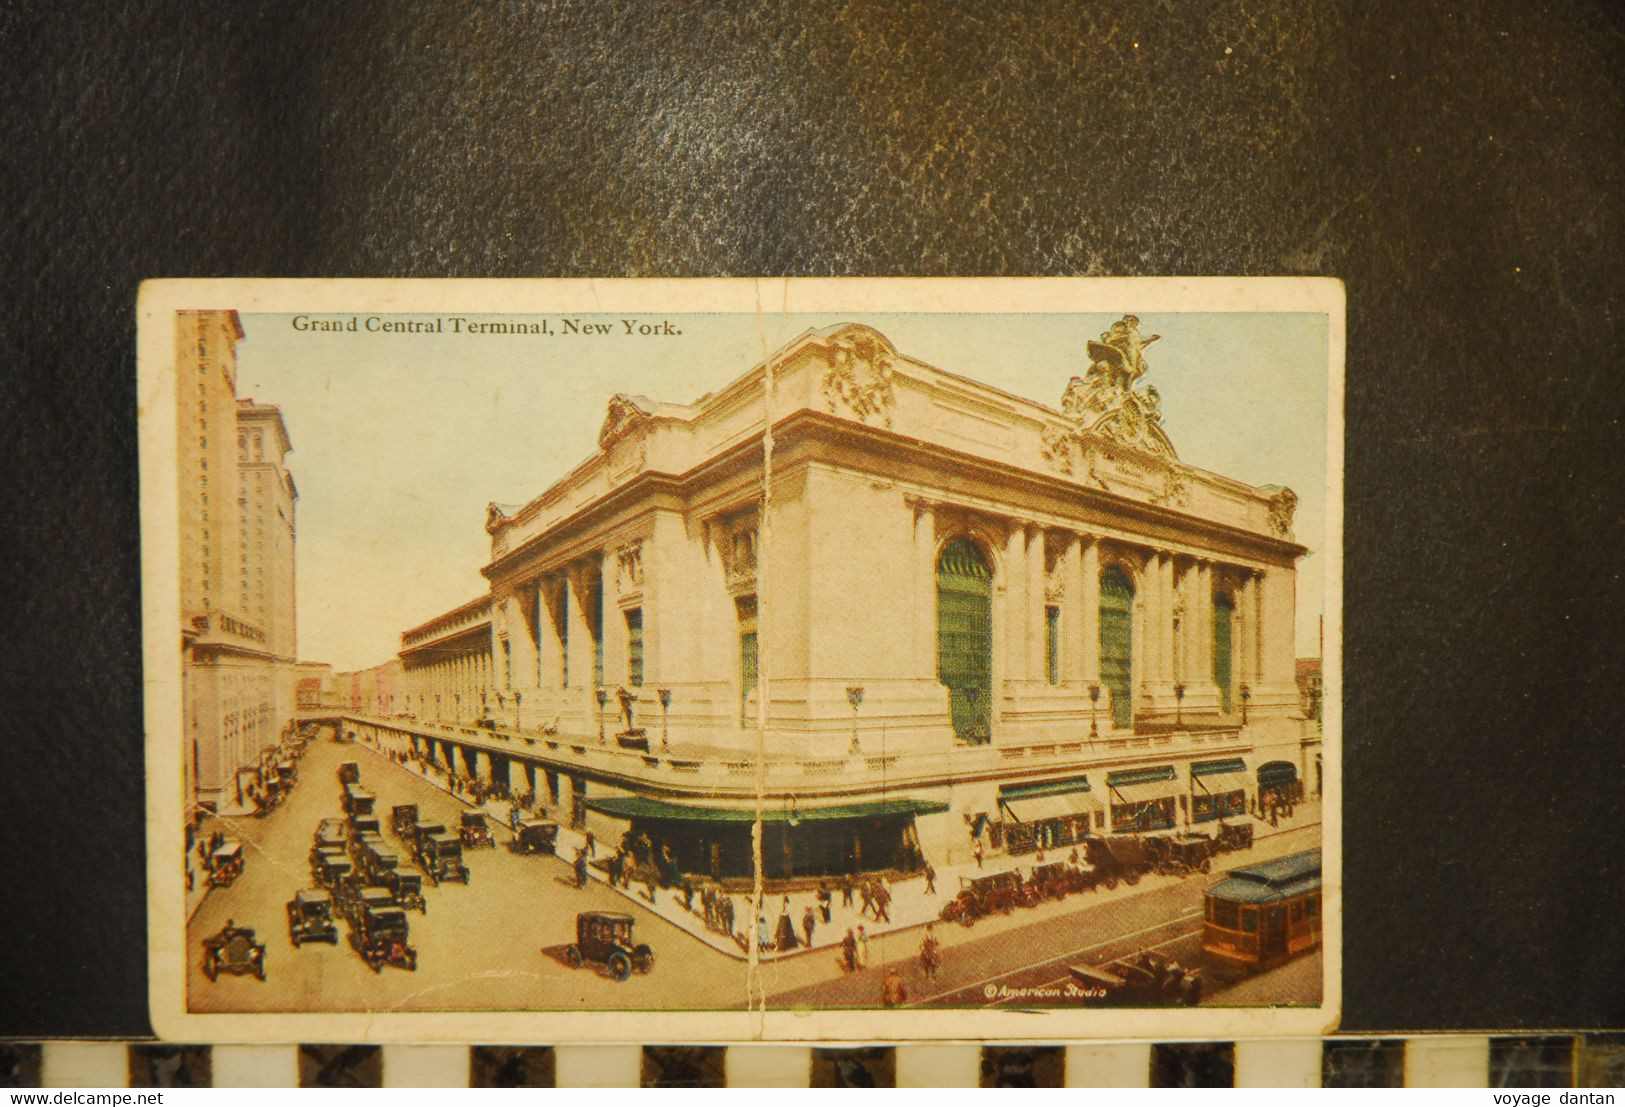 CP, USA, GRAND CENTRAL TERMINAL NEW YORK CITY, Publisher: American Studio N° NY 328 - Transportes